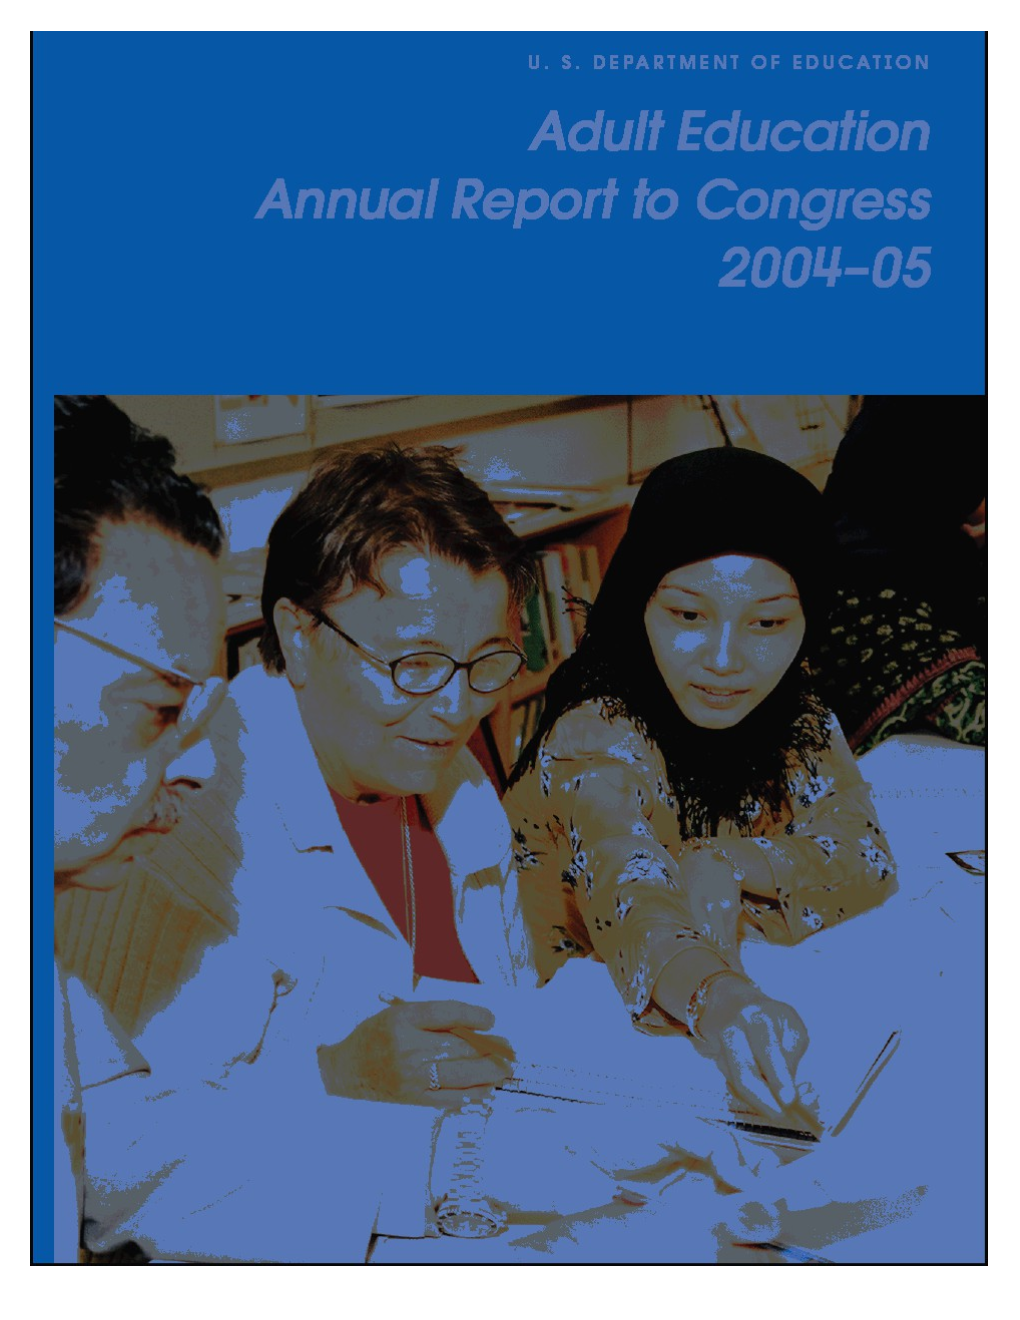 Adult Education Annual Report to Congress, 2004-05 (MS Word)